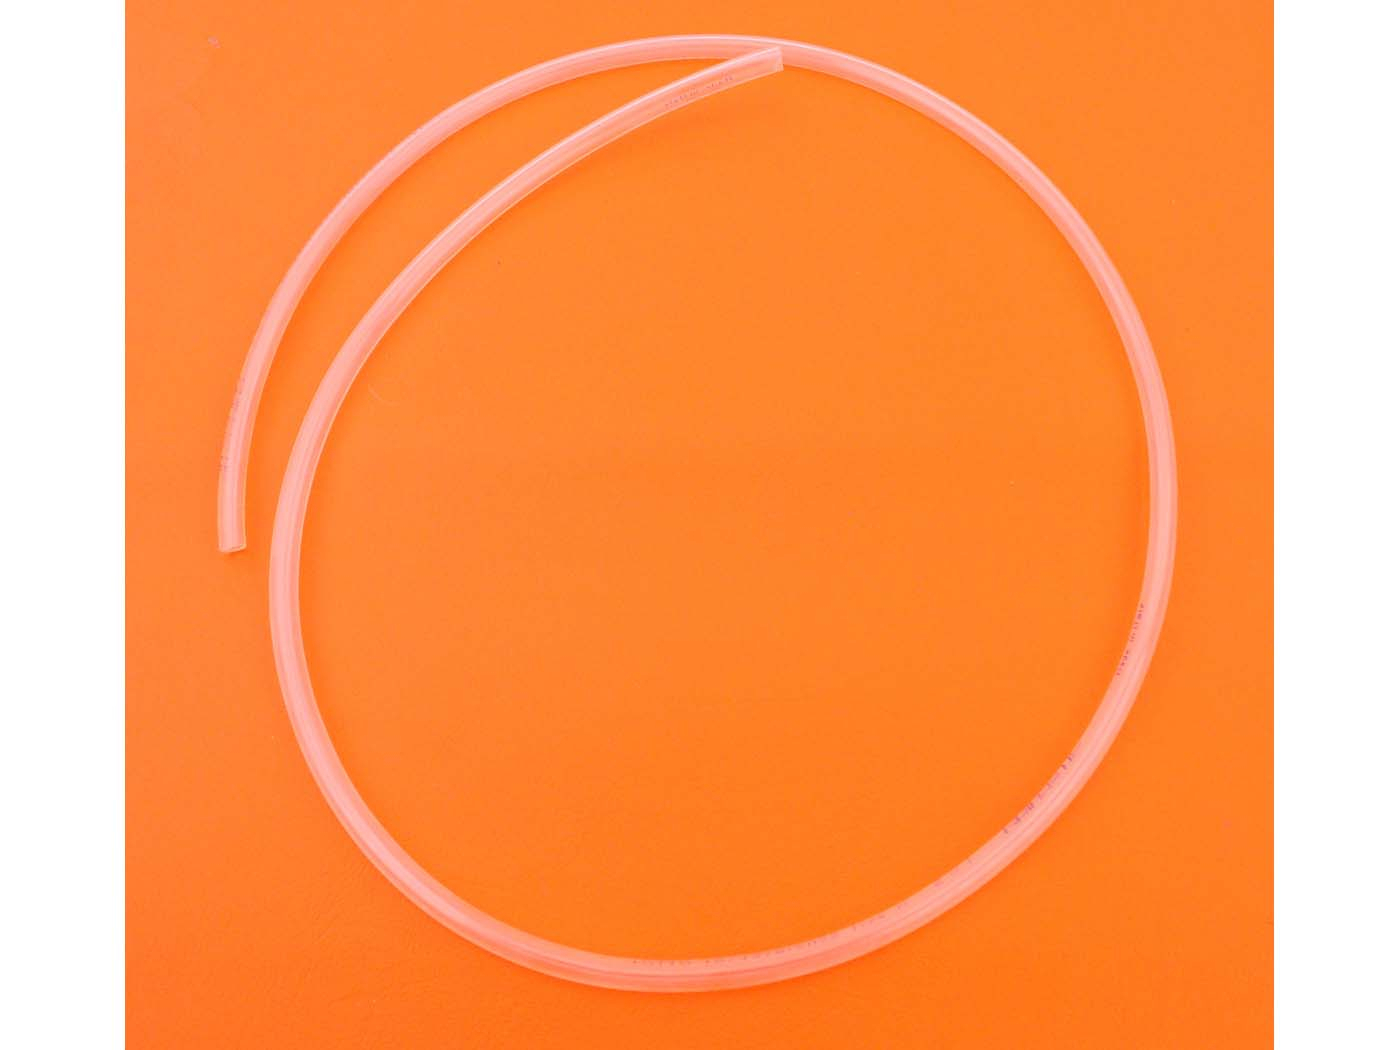 Petrol Hose Drilastic Transparent 50 Meter 6-7mm For Moped Mokick Moped Scooter